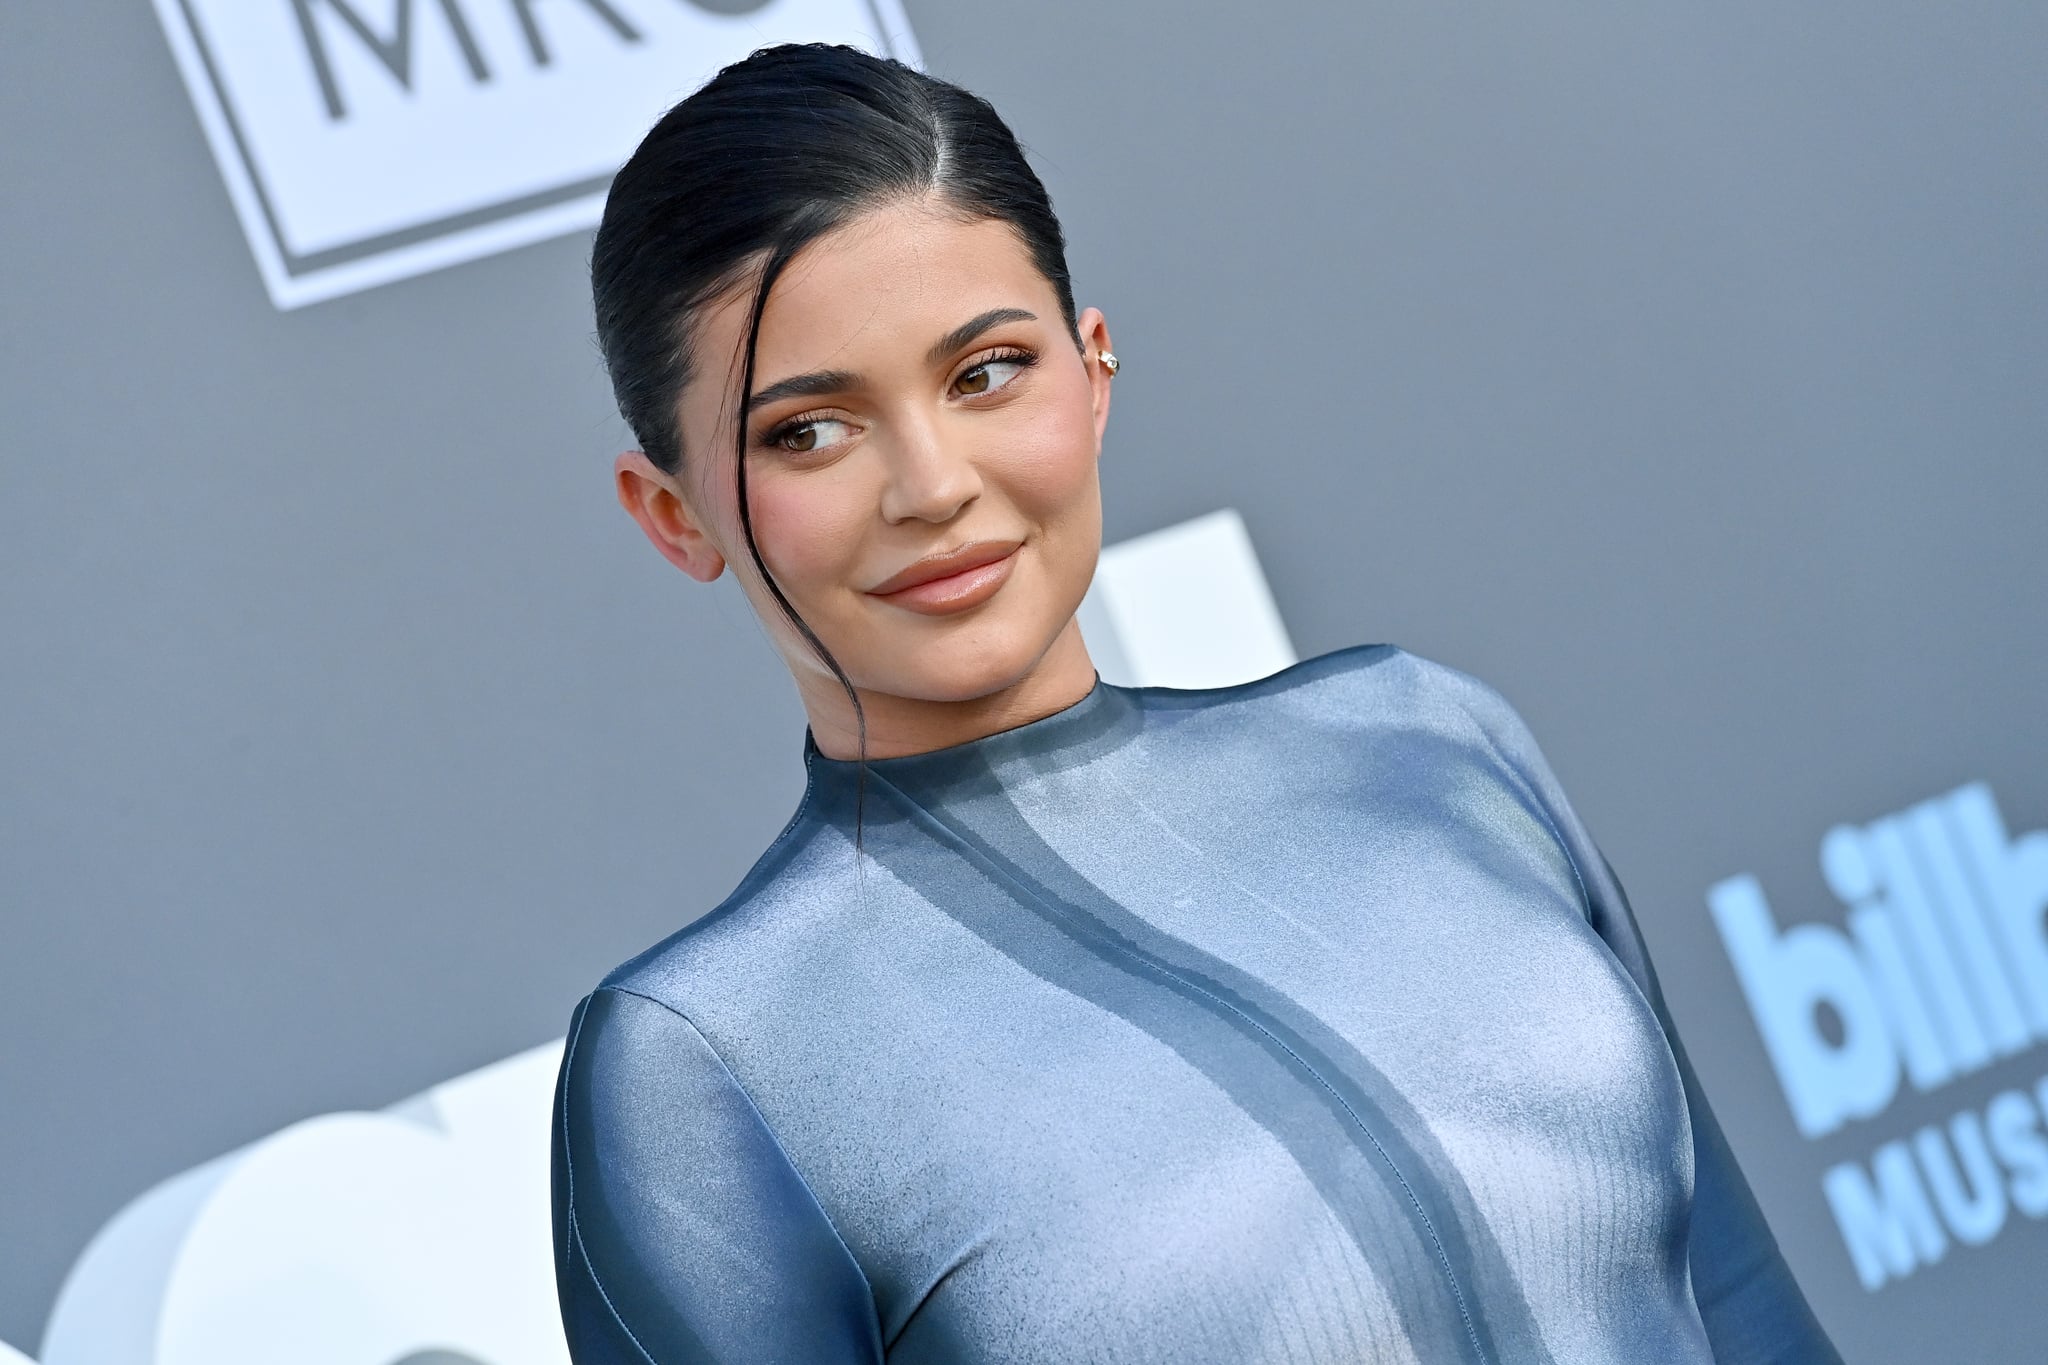 LAS VEGAS, NEVADA - MAY 15: Kylie Jenner attends the 2022 Billboard Music Awards at MGM Grand Garden Arena on May 15, 2022 in Las Vegas, Nevada. (Photo by Axelle/Bauer-Griffin/FilmMagic)